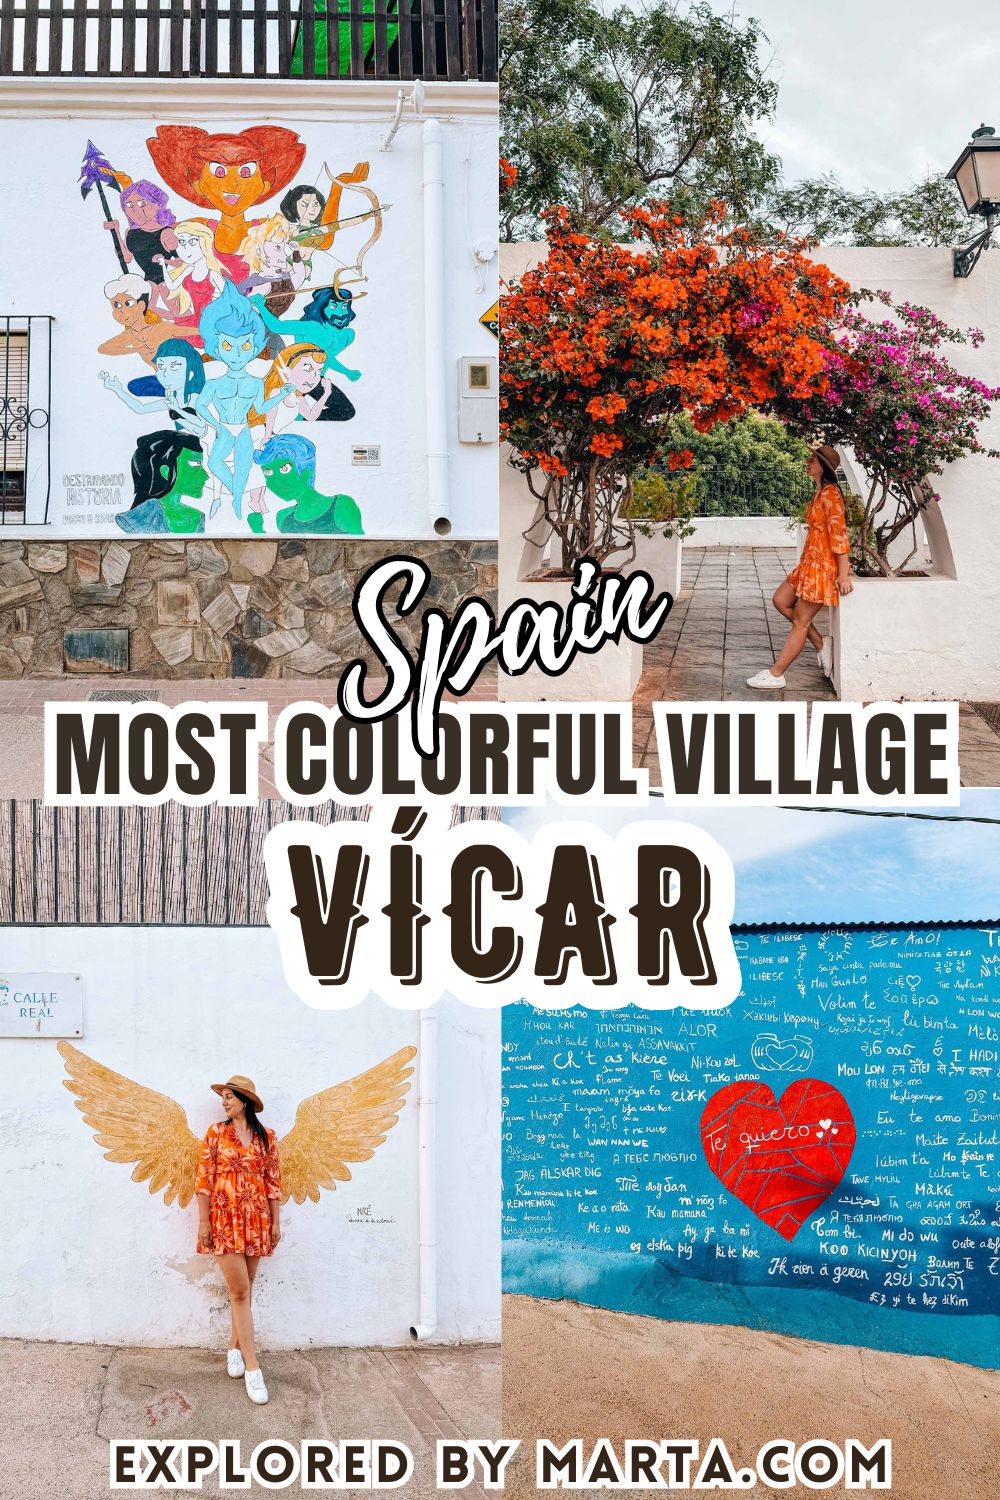 Vicar, Spain - wonderful things to do in the most colorful village in Andalusia